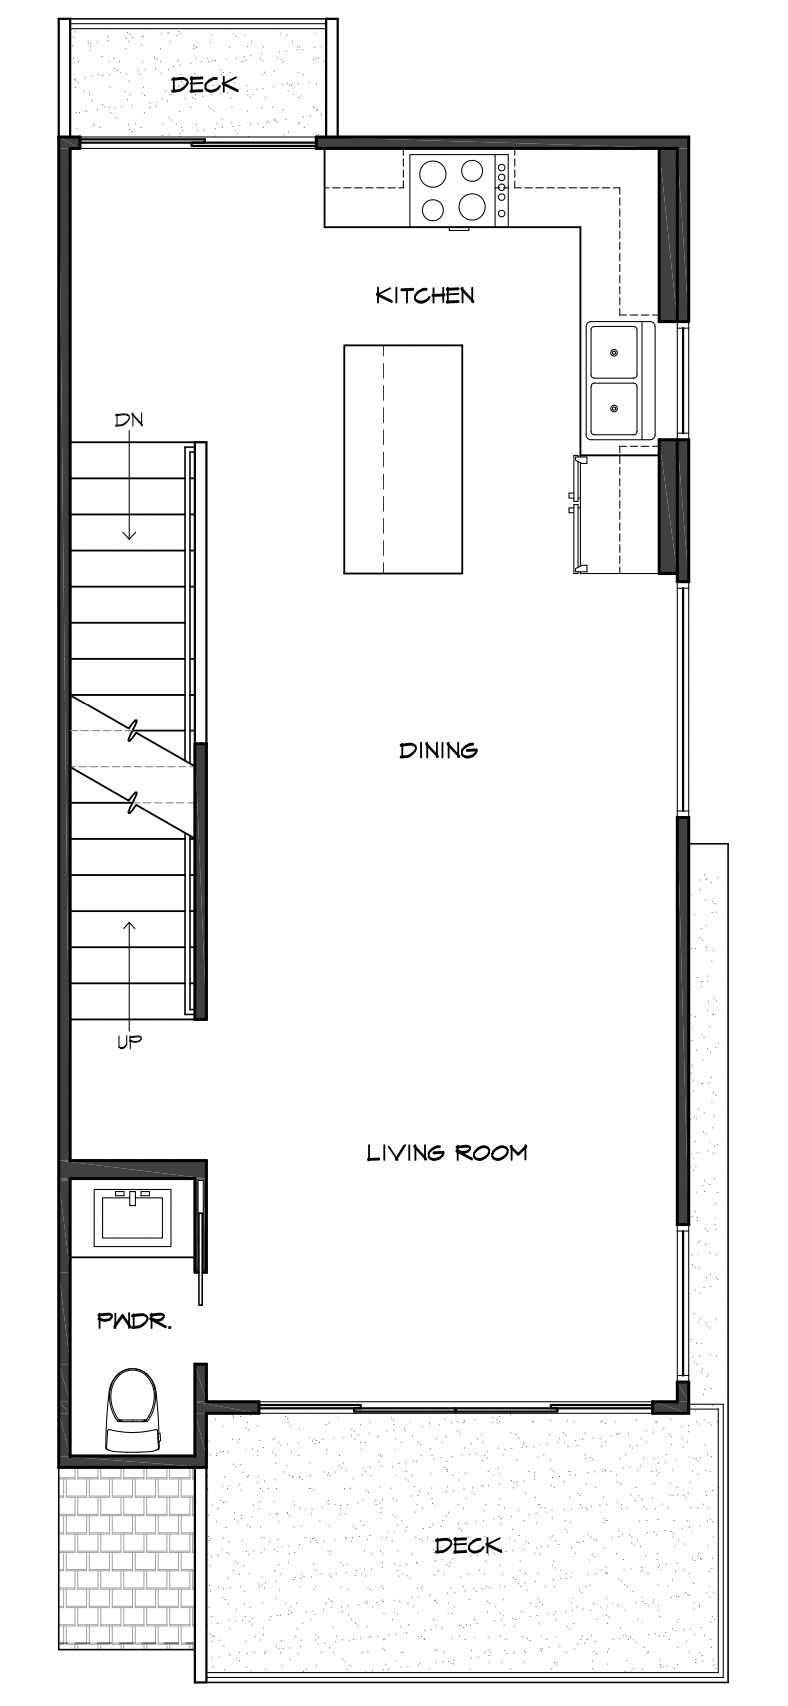 Real Estate Floor Plan Reference for Virtual Tour: Second Floor